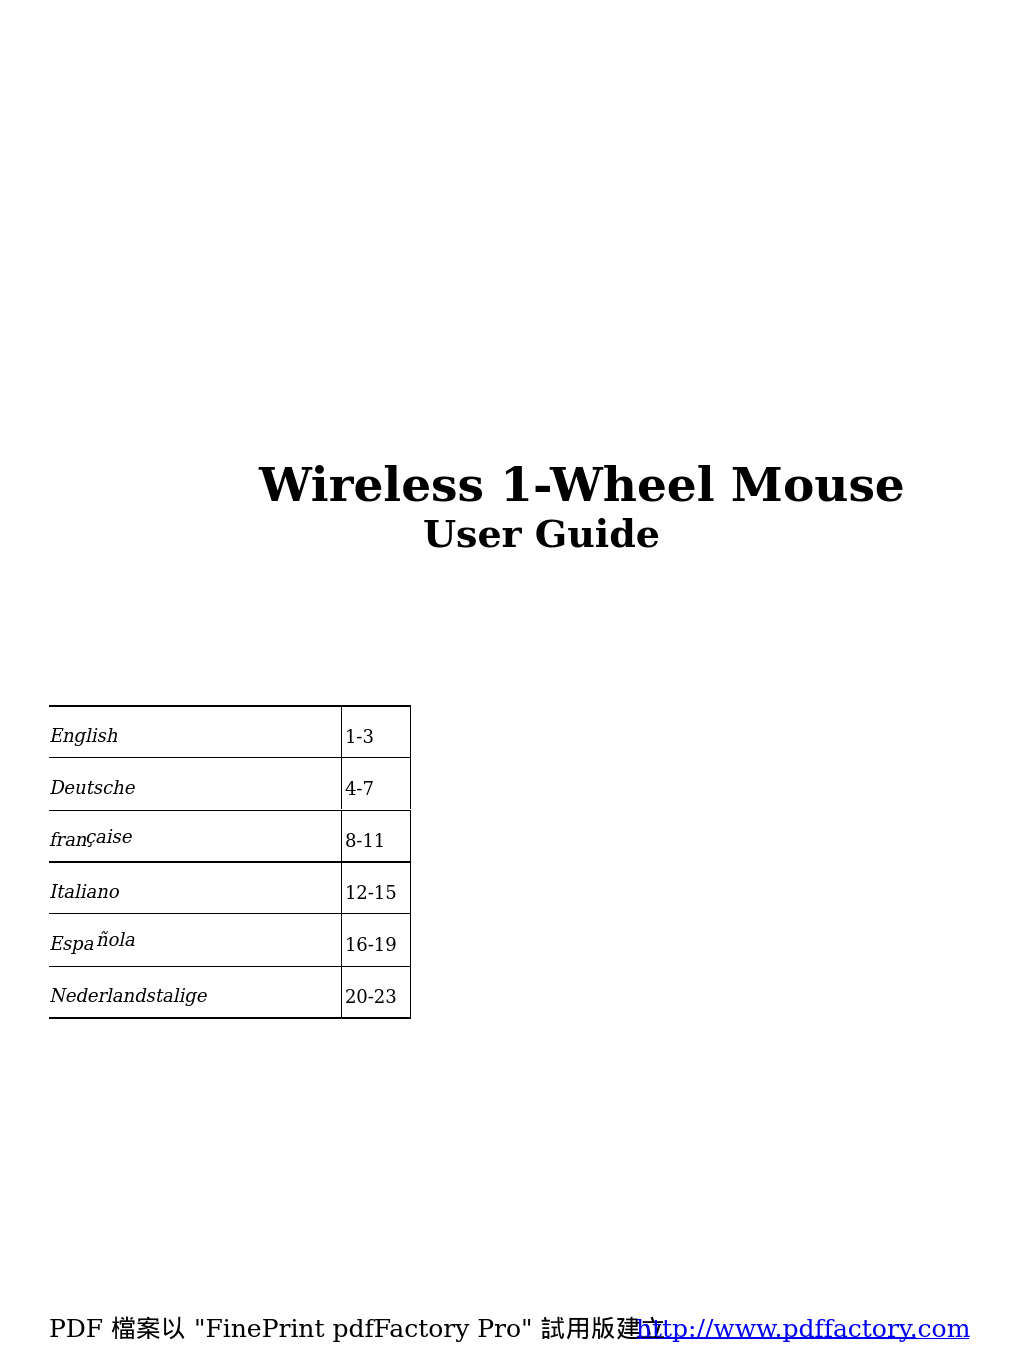 Wireless 1-Wheel Mouse (Page 1)